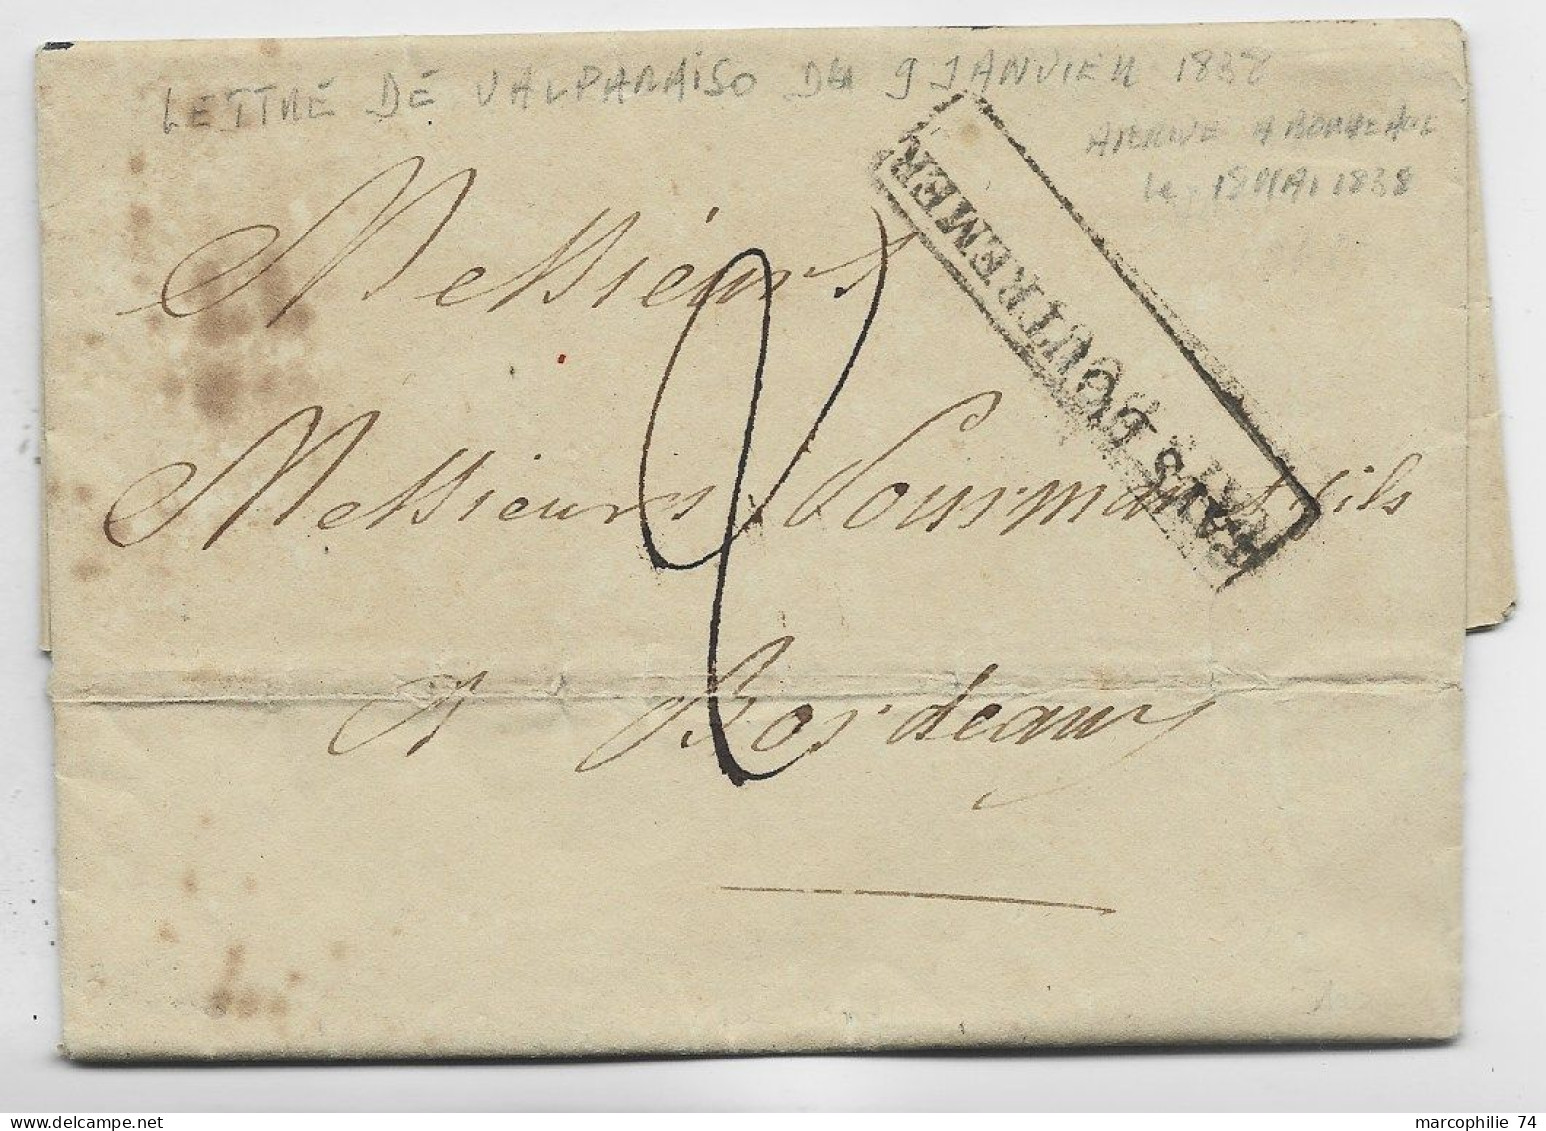 CHILE CHILI LETTRE COVER VALPARAISO 1838 LETTRE COVER  BORDEAUX FRANCE + PAYS D'OUTREMER - Schiffspost